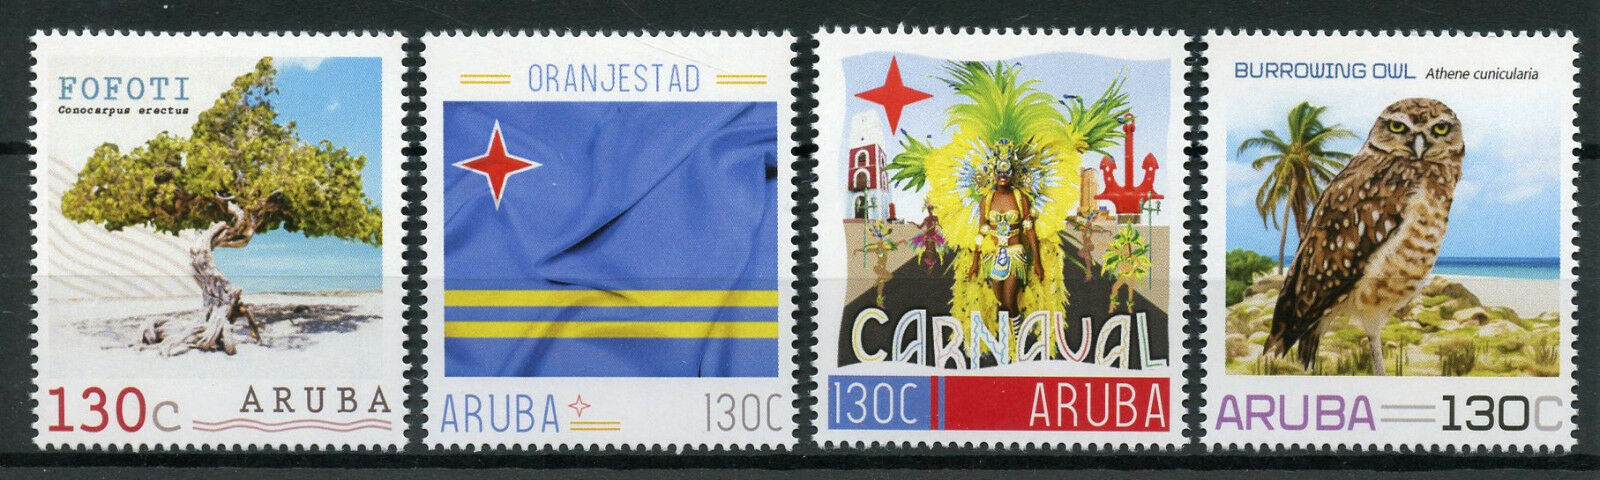 Aruba Birds on Stamps 2018 MNH Personalised Trees Owls Carnival Flags 4v Set